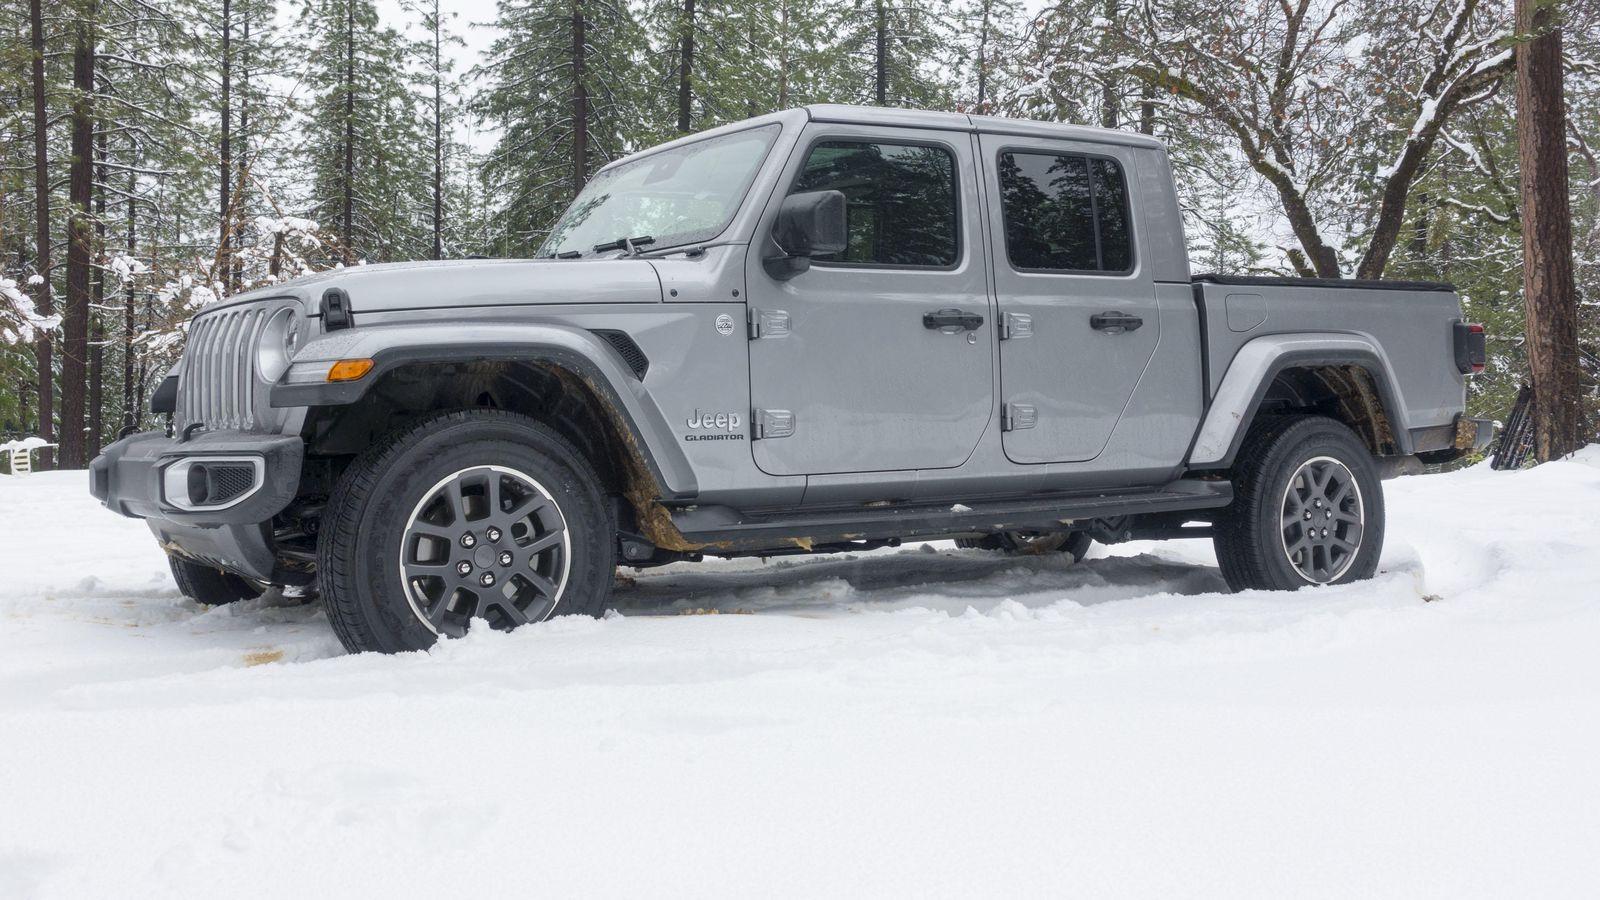 Jeep Gladiator costs $100 more than a Wrangler